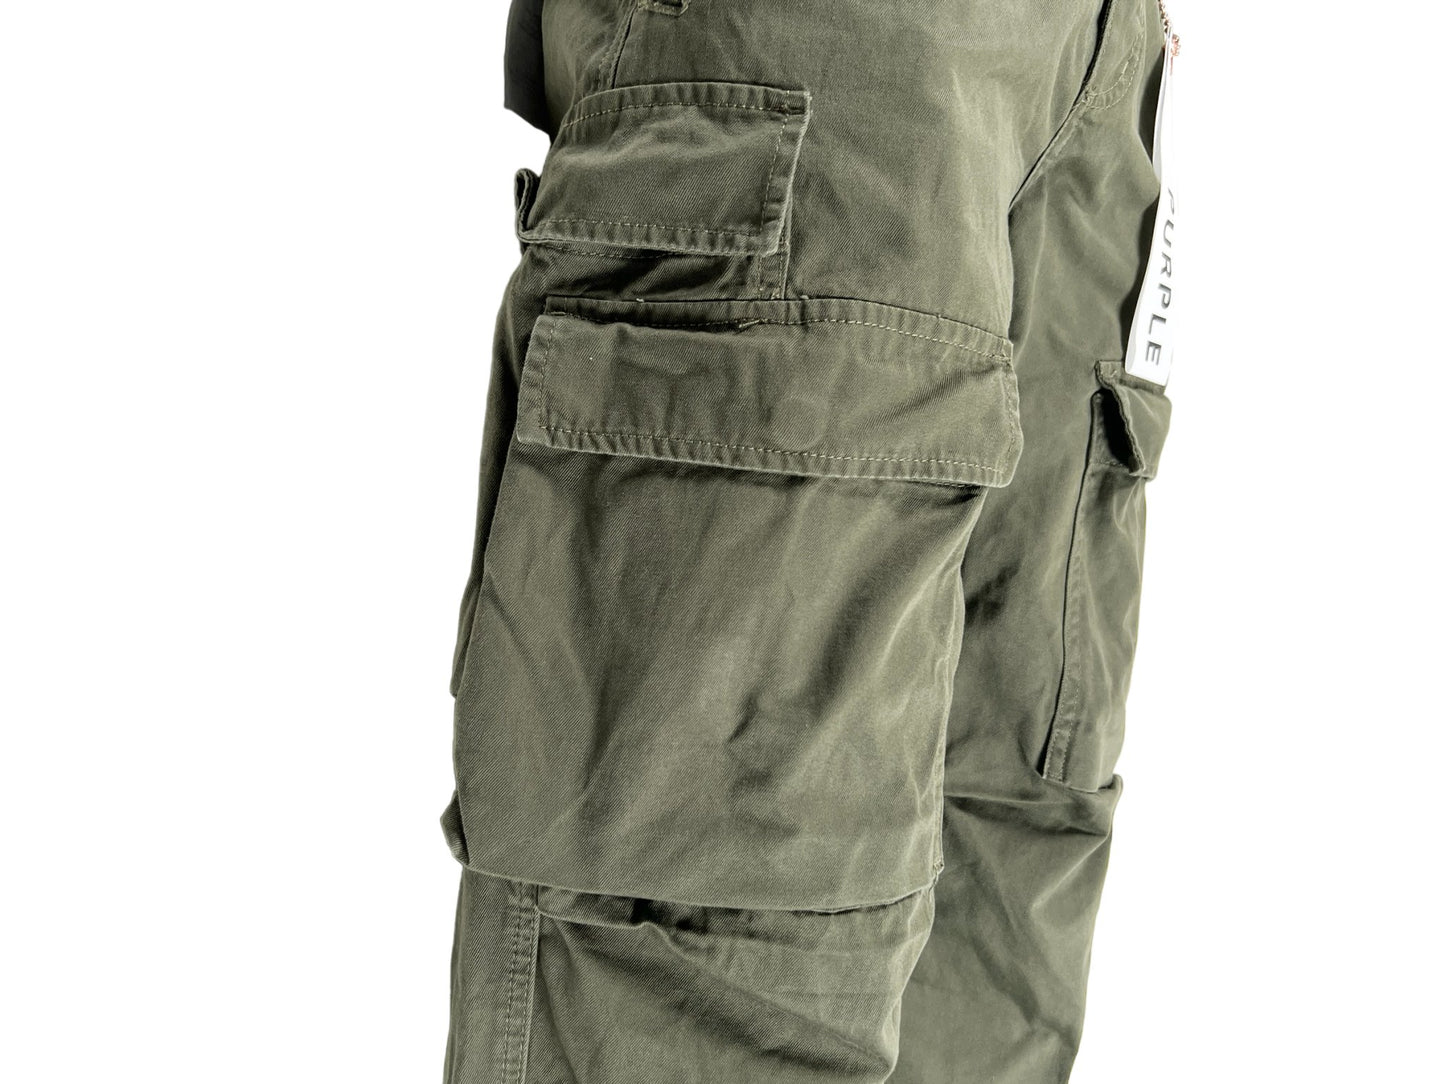 A man wearing comfortable PURPLE BRAND cargo pants in olive green with drawstring ties.